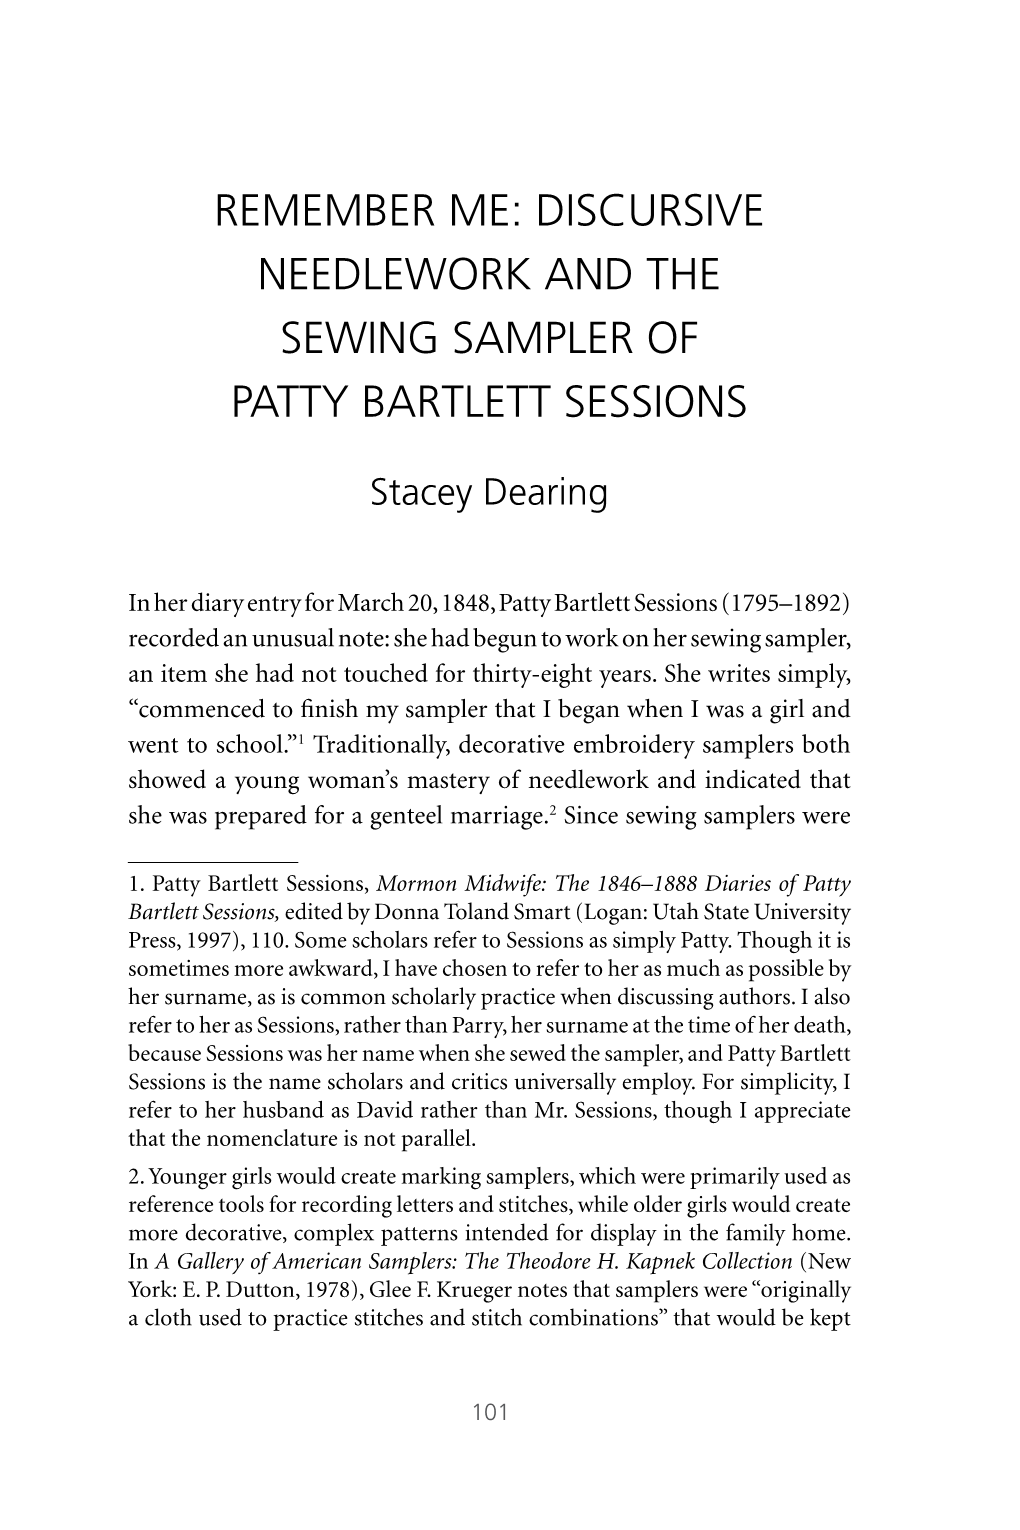 Discursive Needlework and the Sewing Sampler of Patty Bartlett Sessions